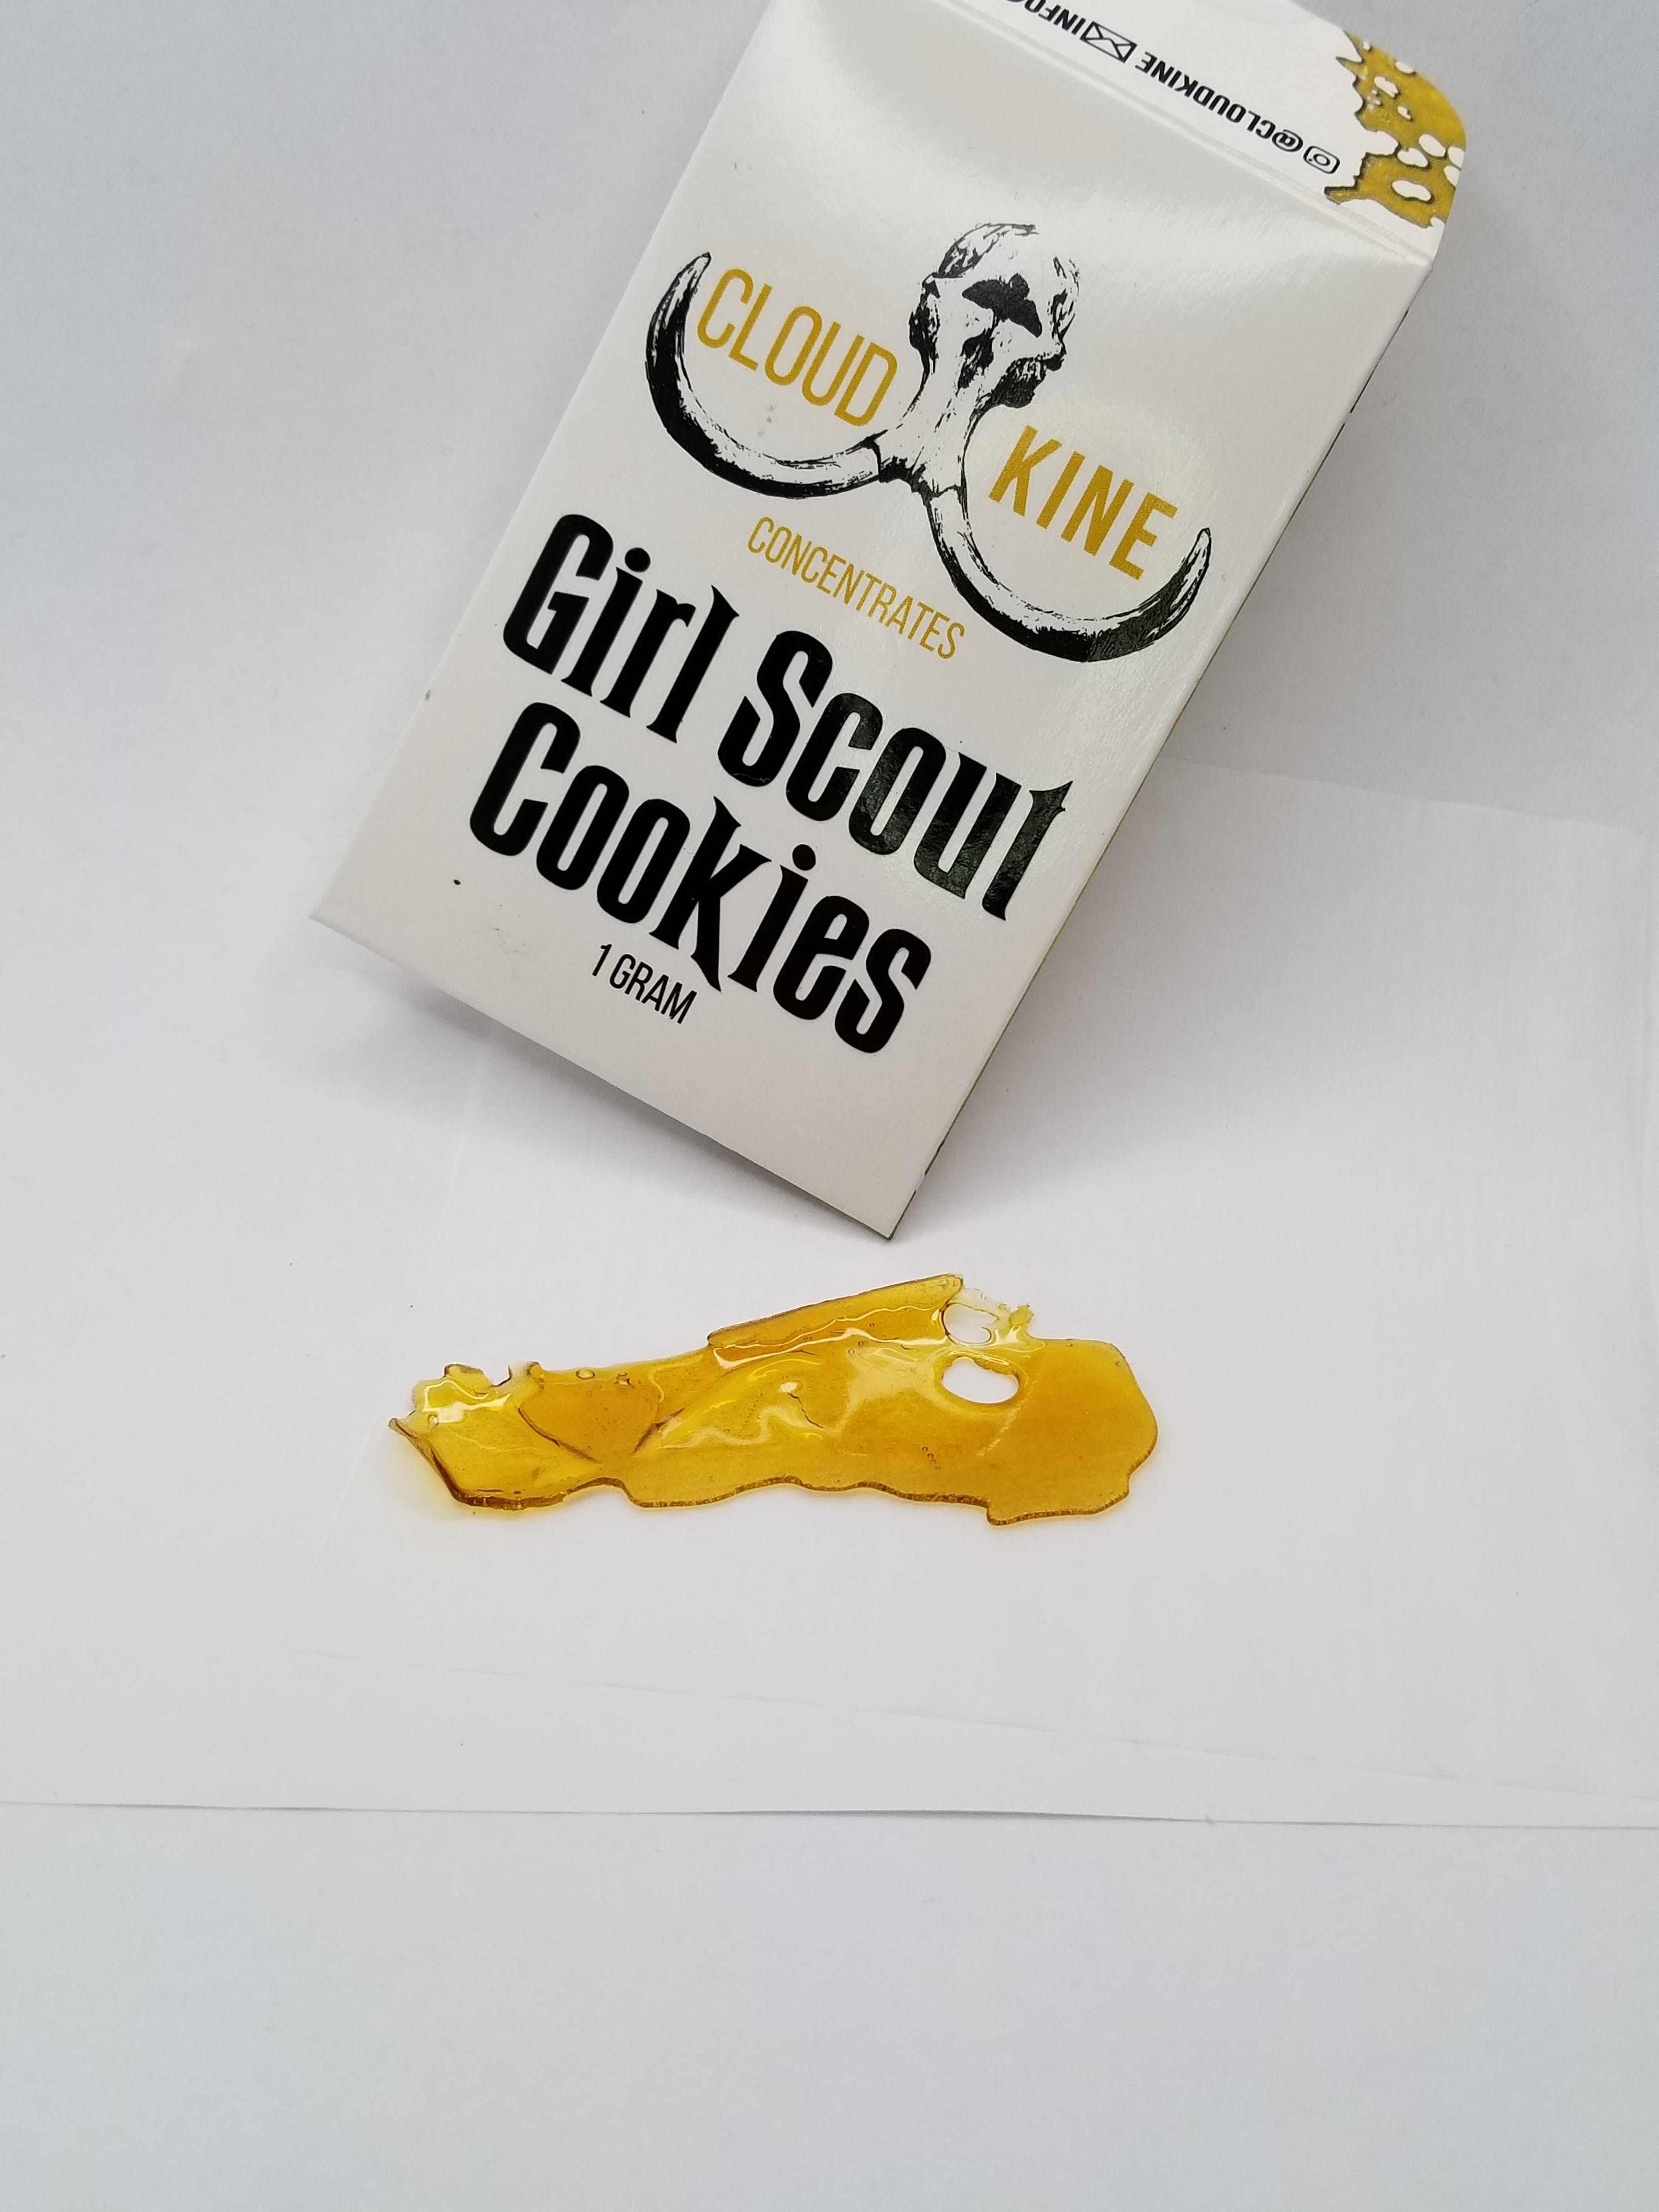 concentrate-cloud-kine-girl-scout-cookies